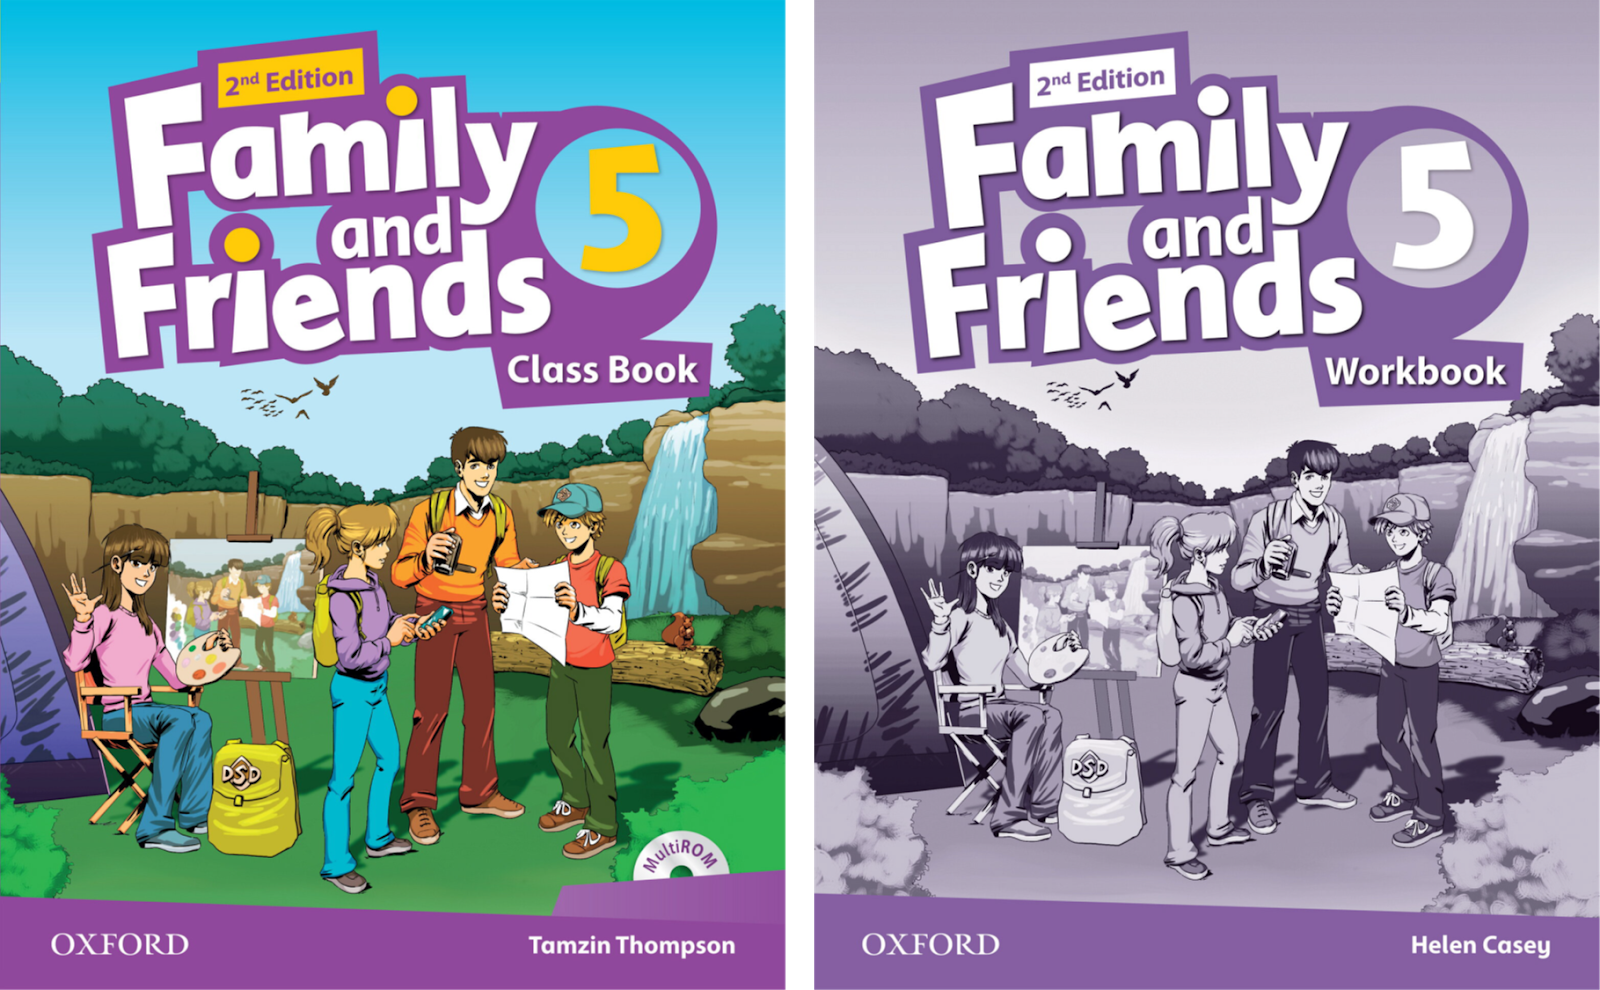 Family and friends students book. Family and friends 2 (2nd Edition) комплект. \Фэмили энд френдс 2 издание. Учебник Oxford Family and friends 2. Family and friends 2 2nd Edition Classbook.